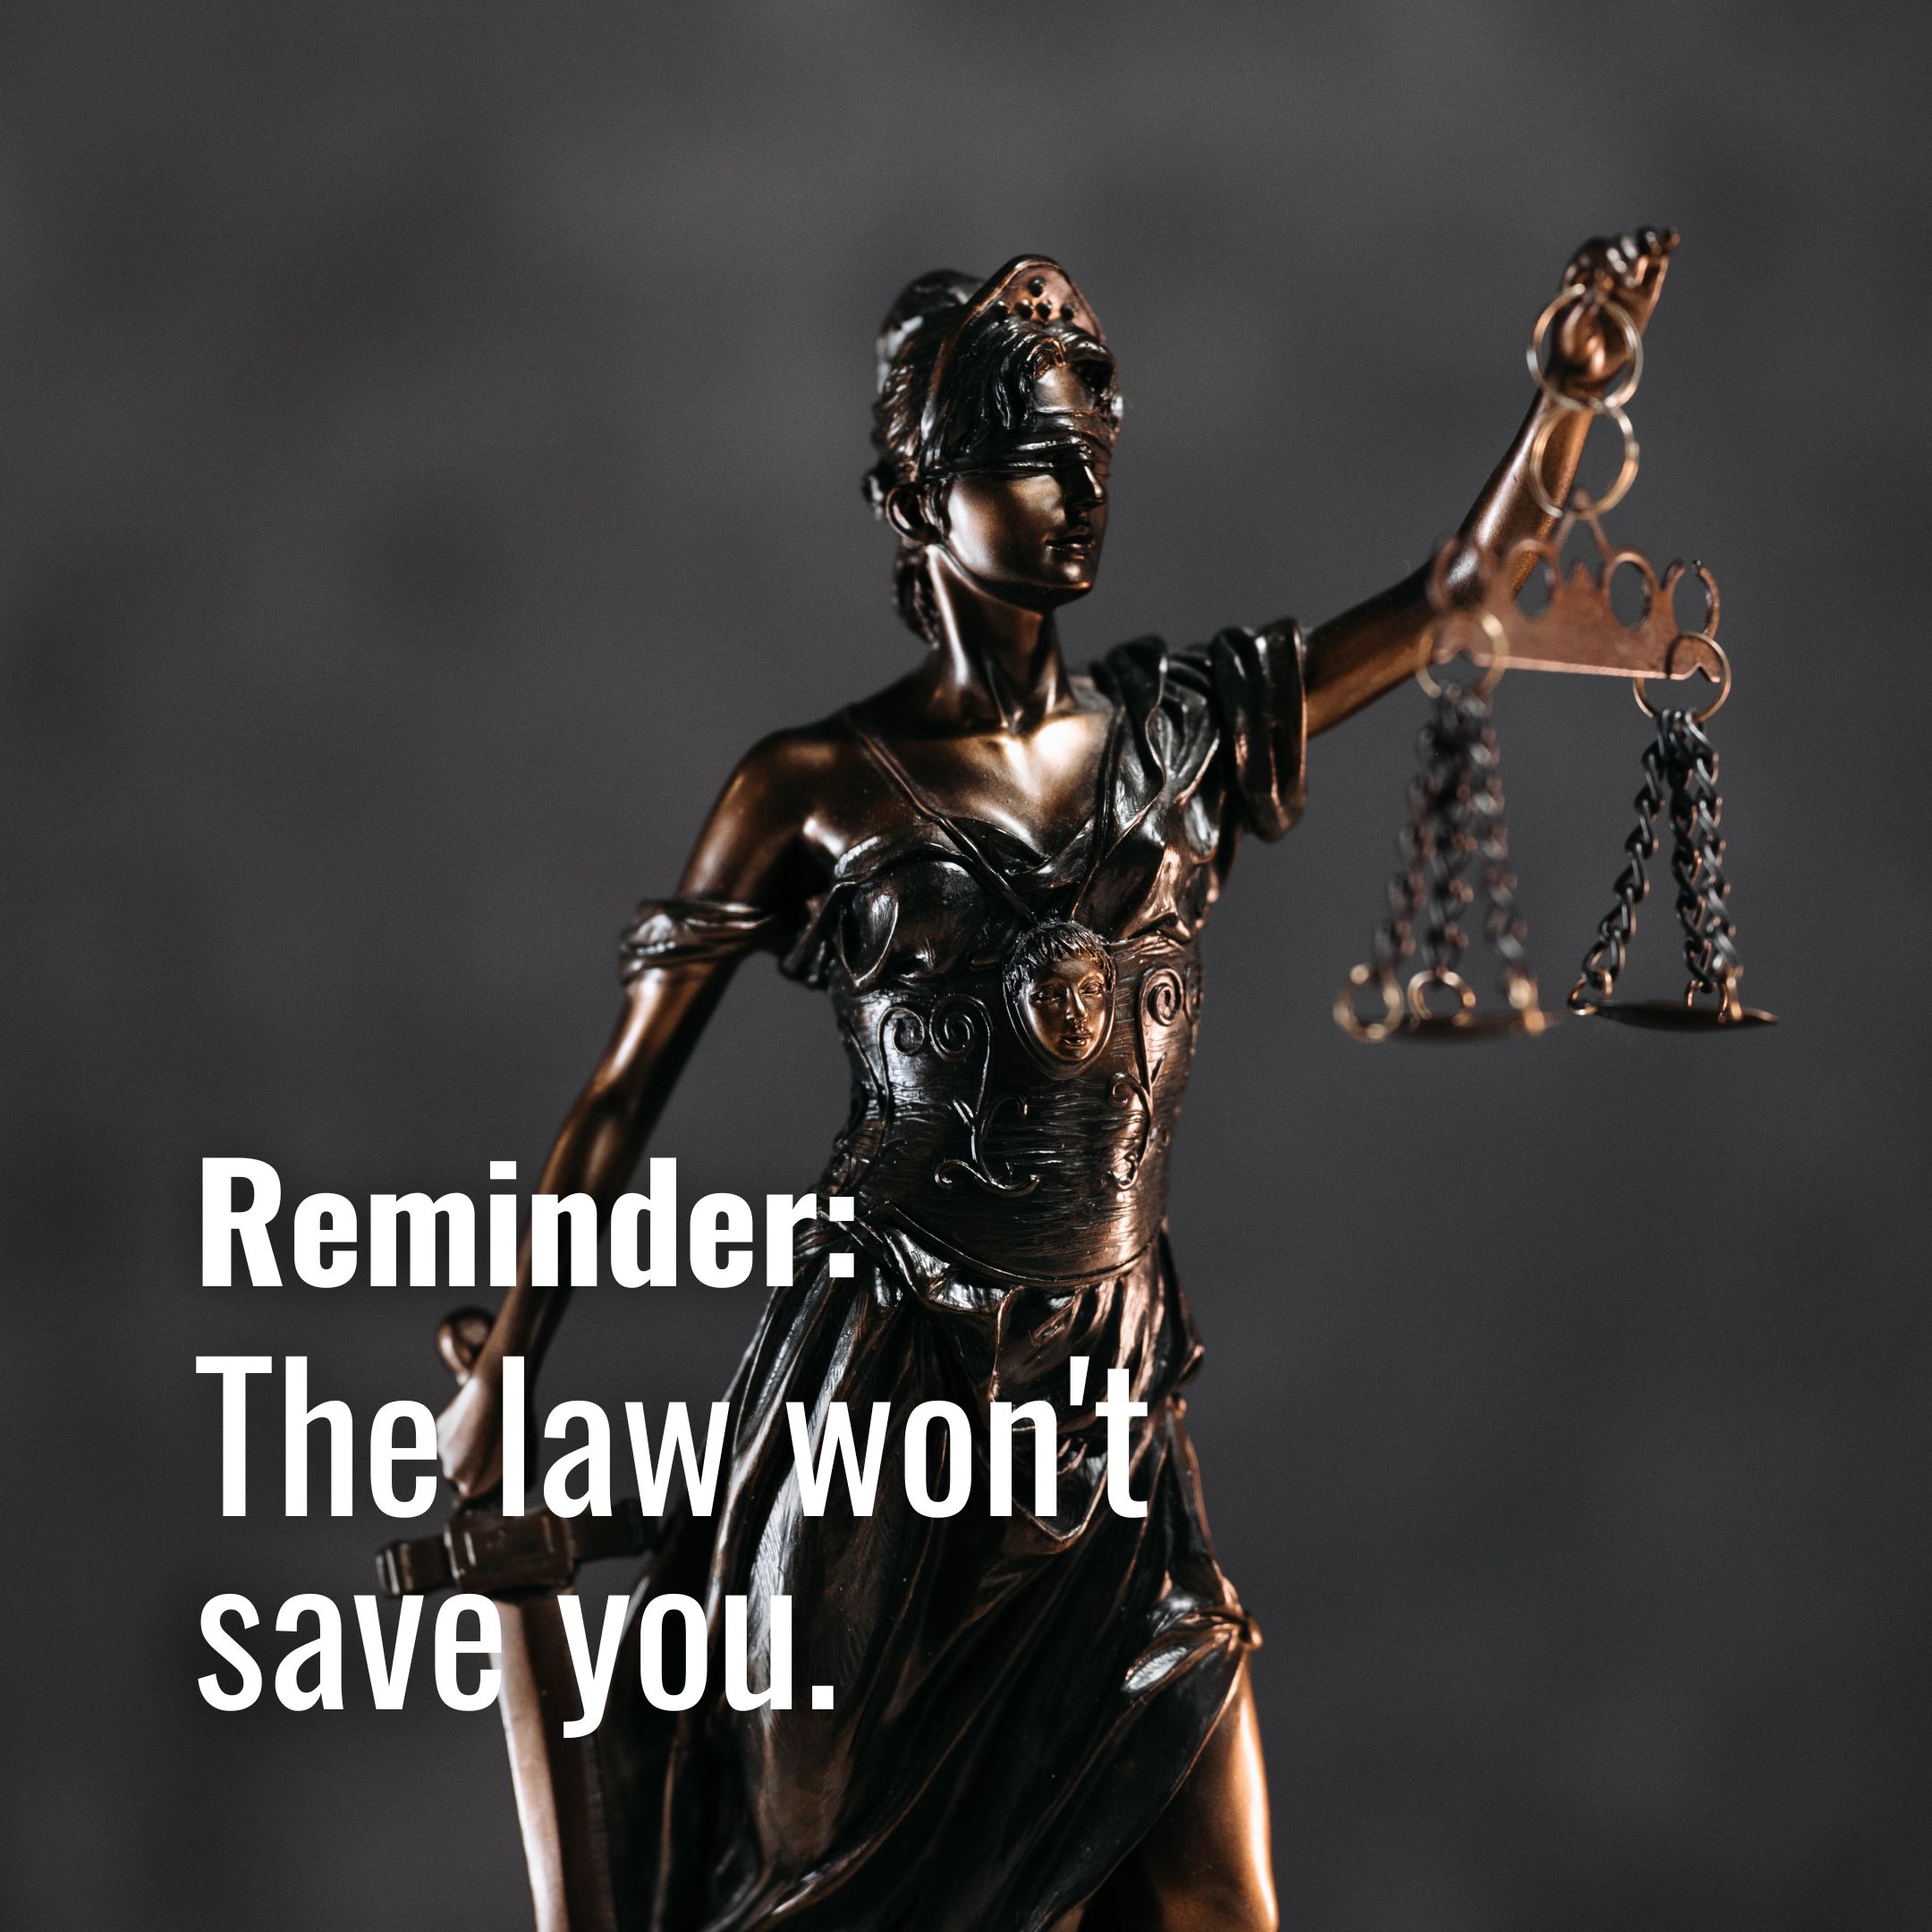 The law won’t save you.